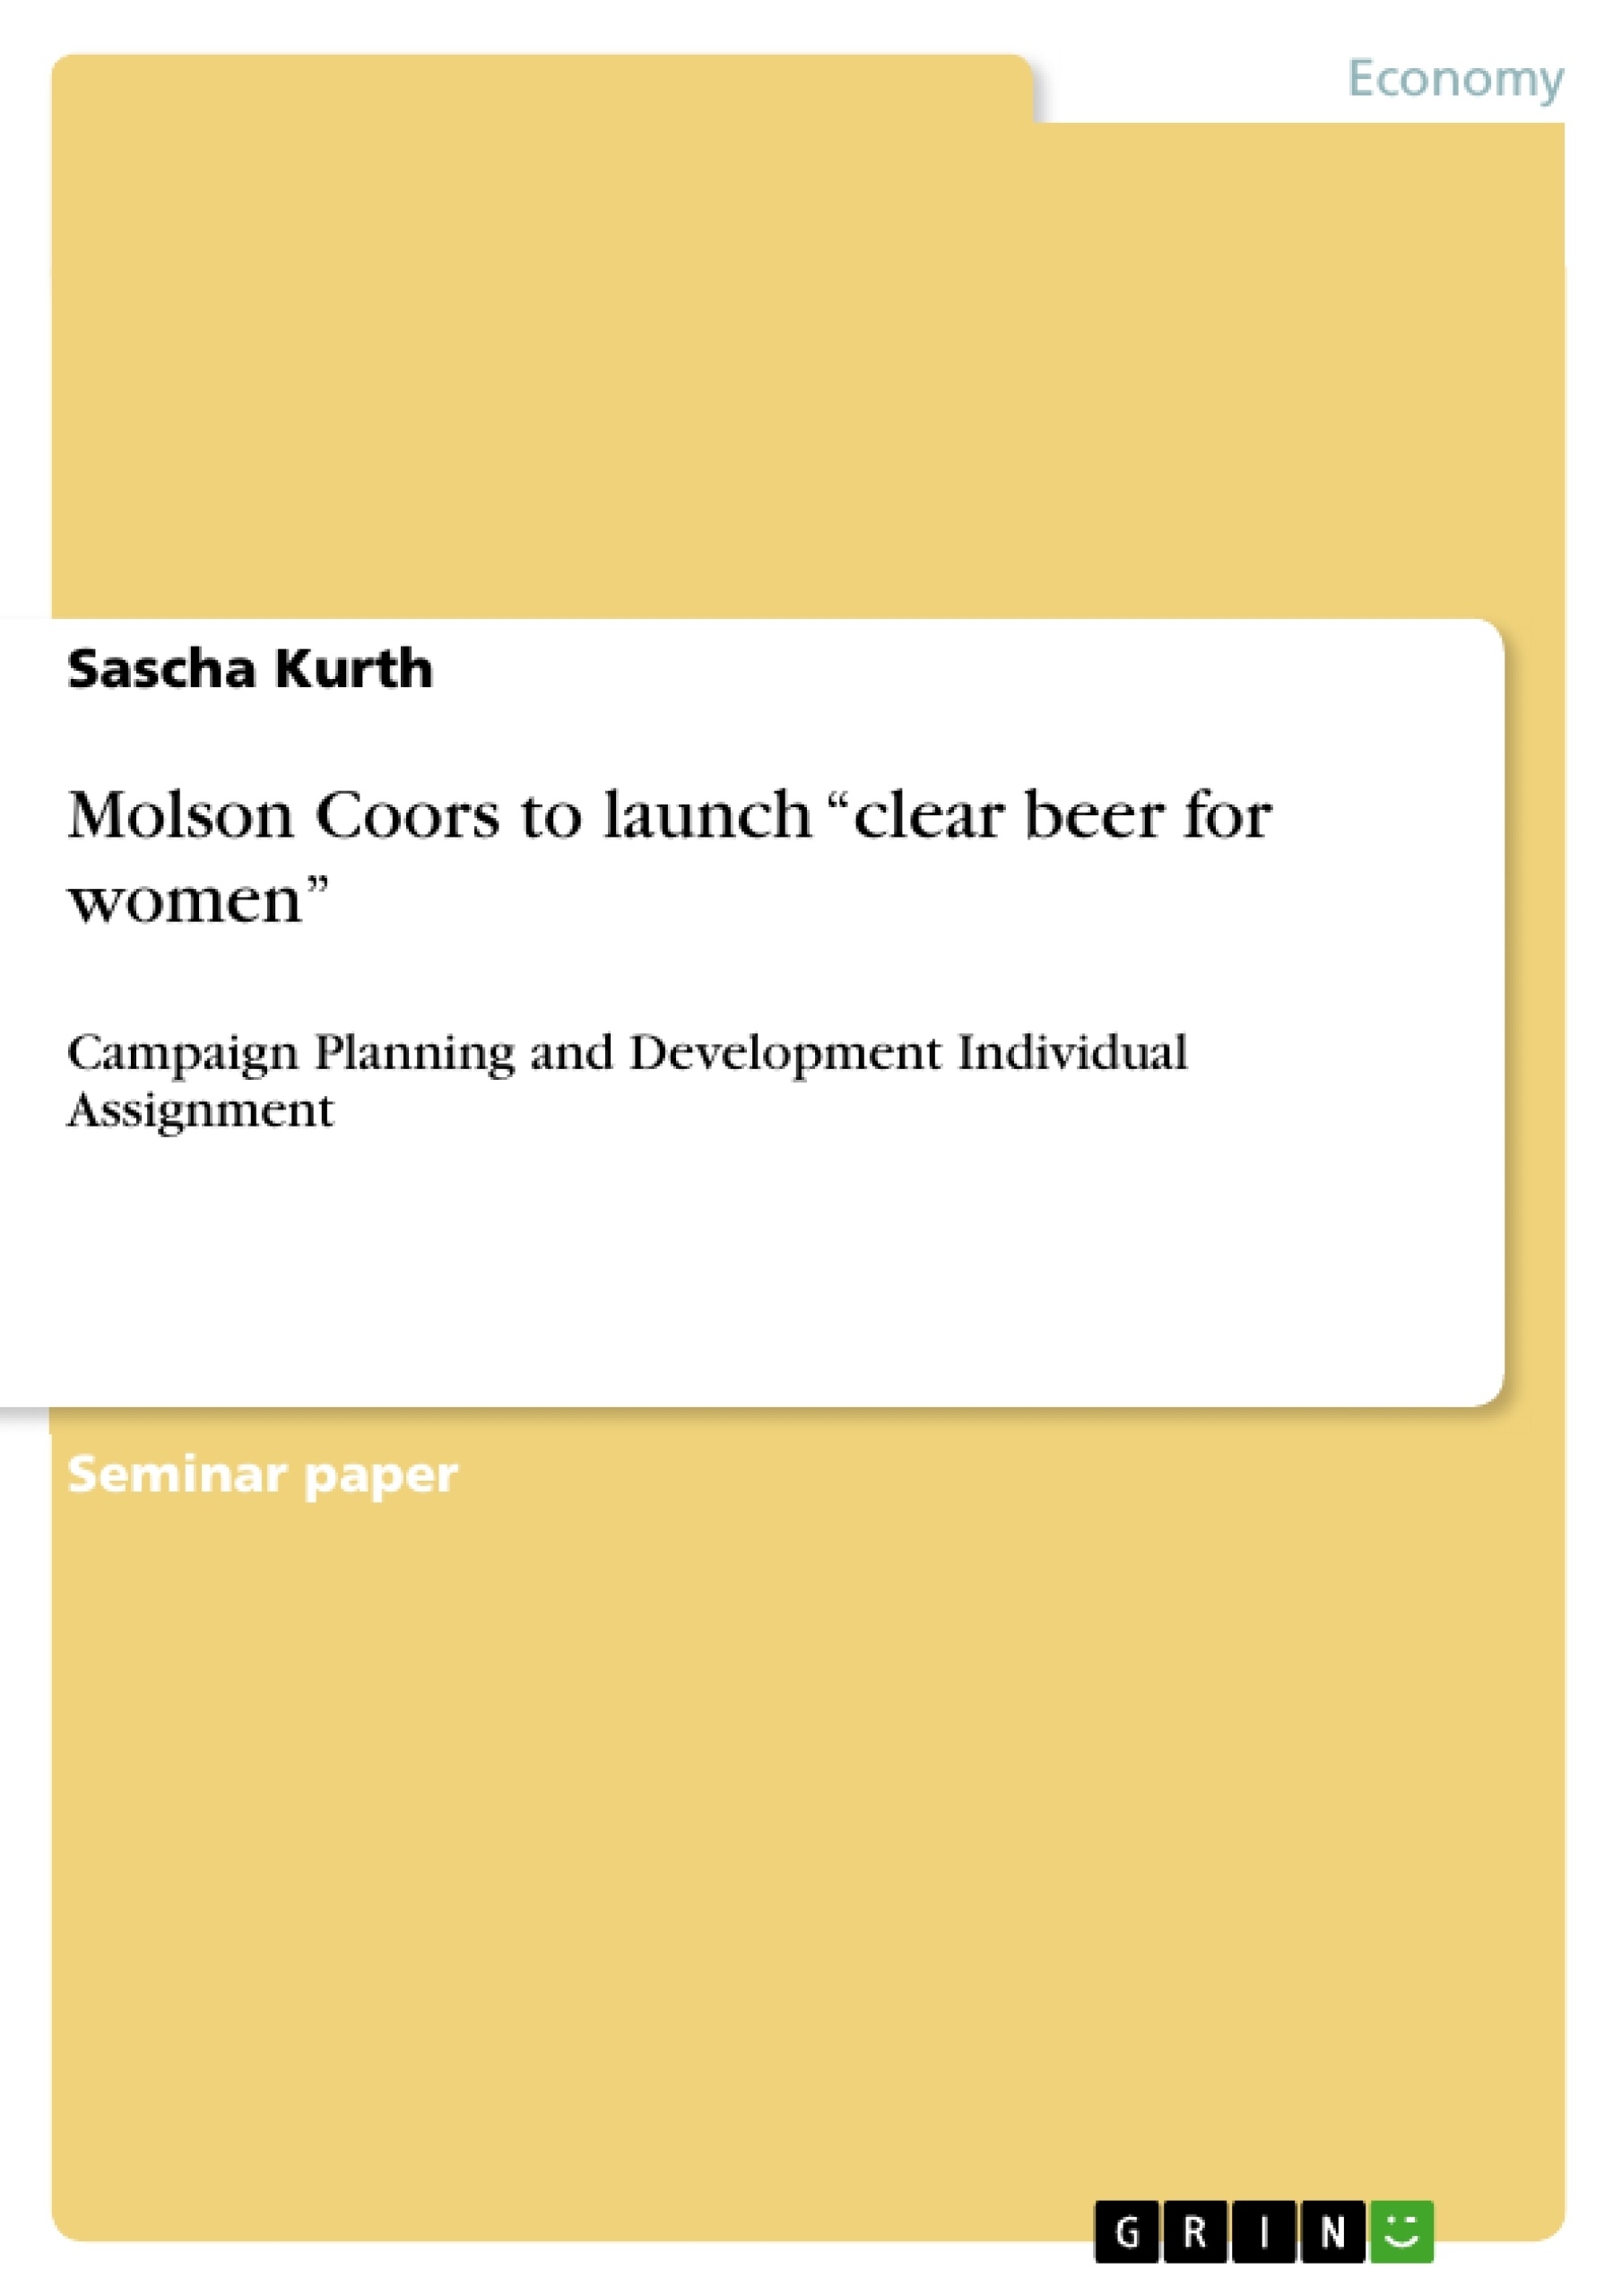 Title: Molson Coors to launch “clear beer for women”